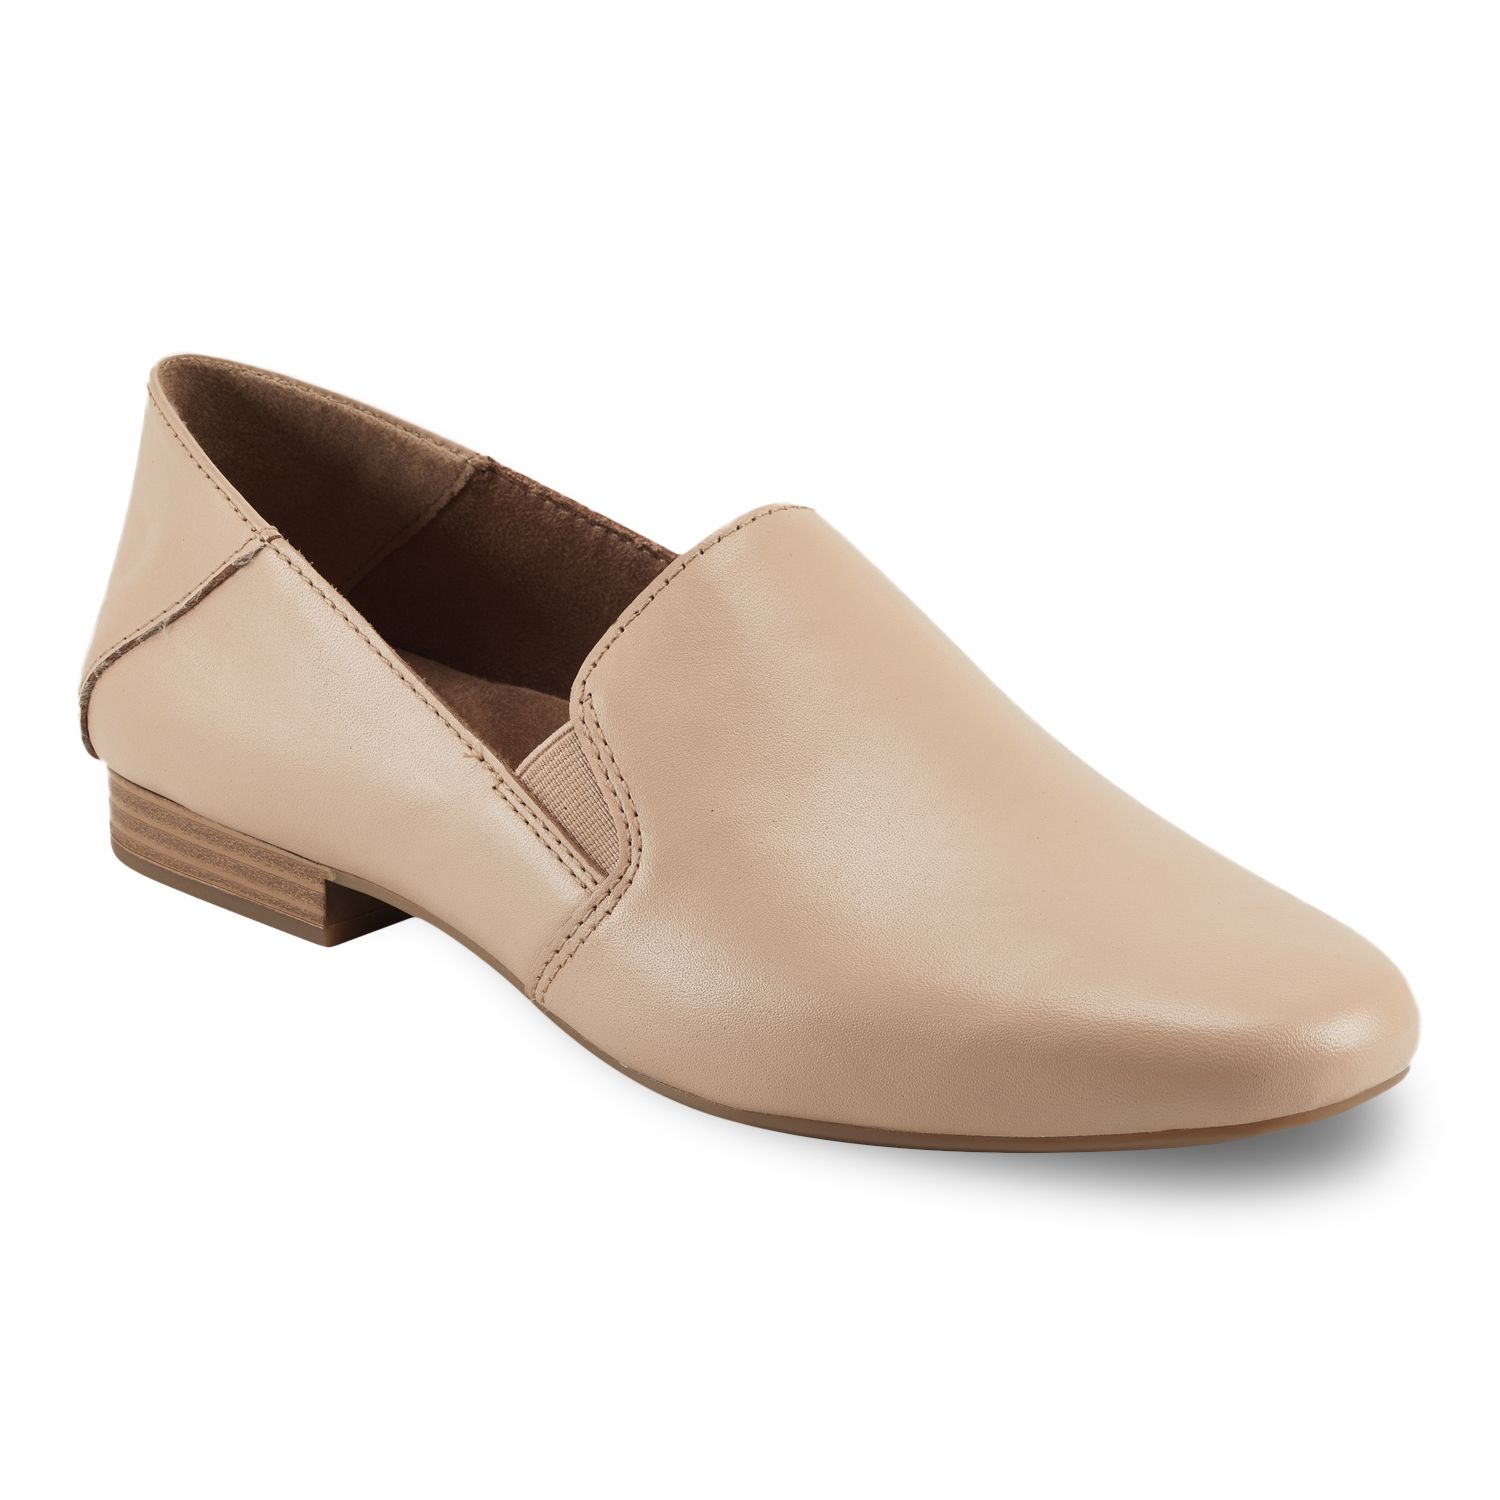 Image for Earth Origins Ryanne Women's Loafers at Kohl's.